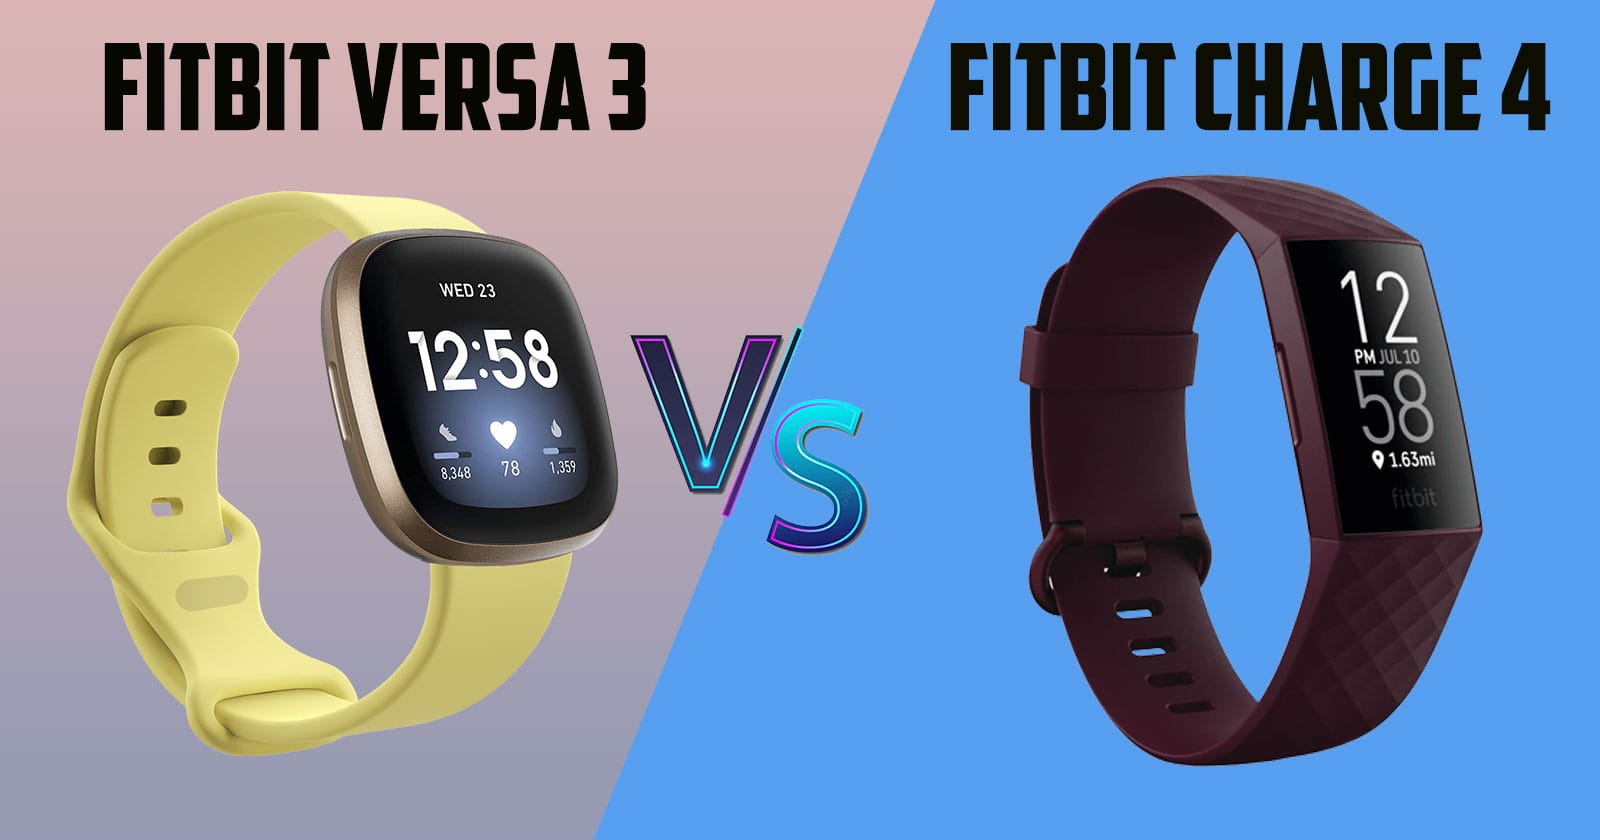 What Is the Difference Between Fitbit Versa 3 and Charge 4